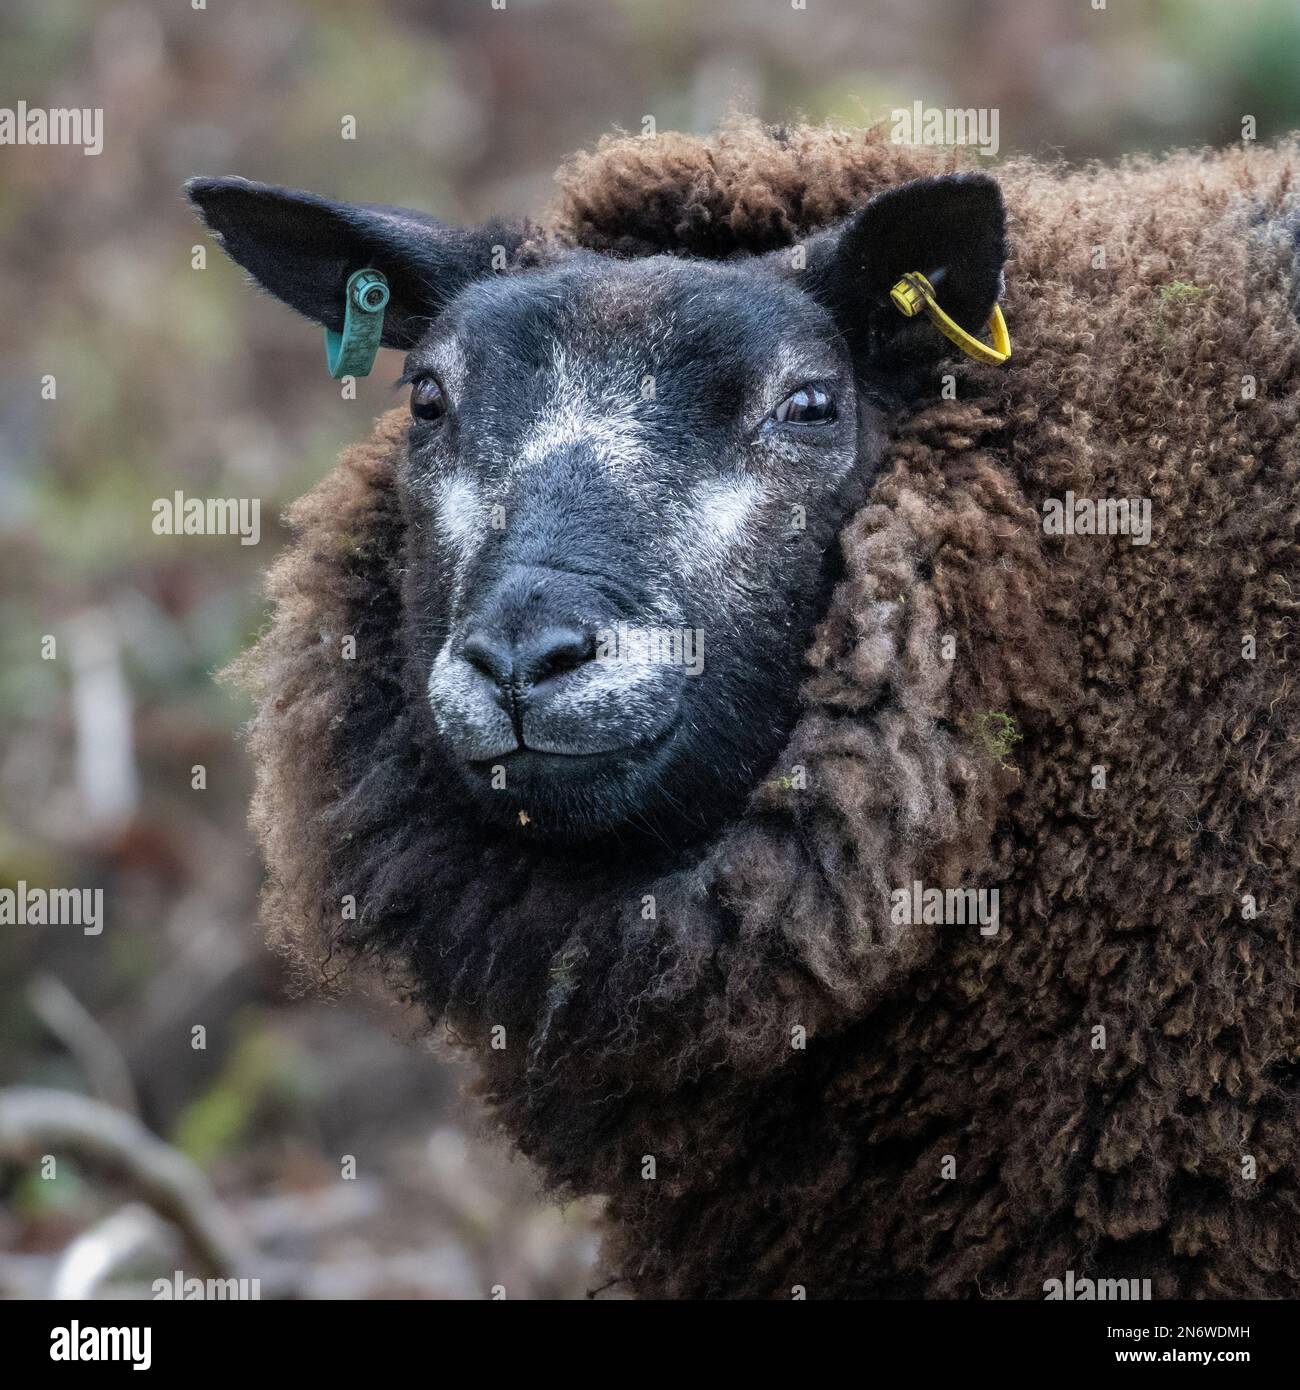 Portrait of a blue texel sheep with a black and white face and brown wool with ear identification tags, England Stock Photo